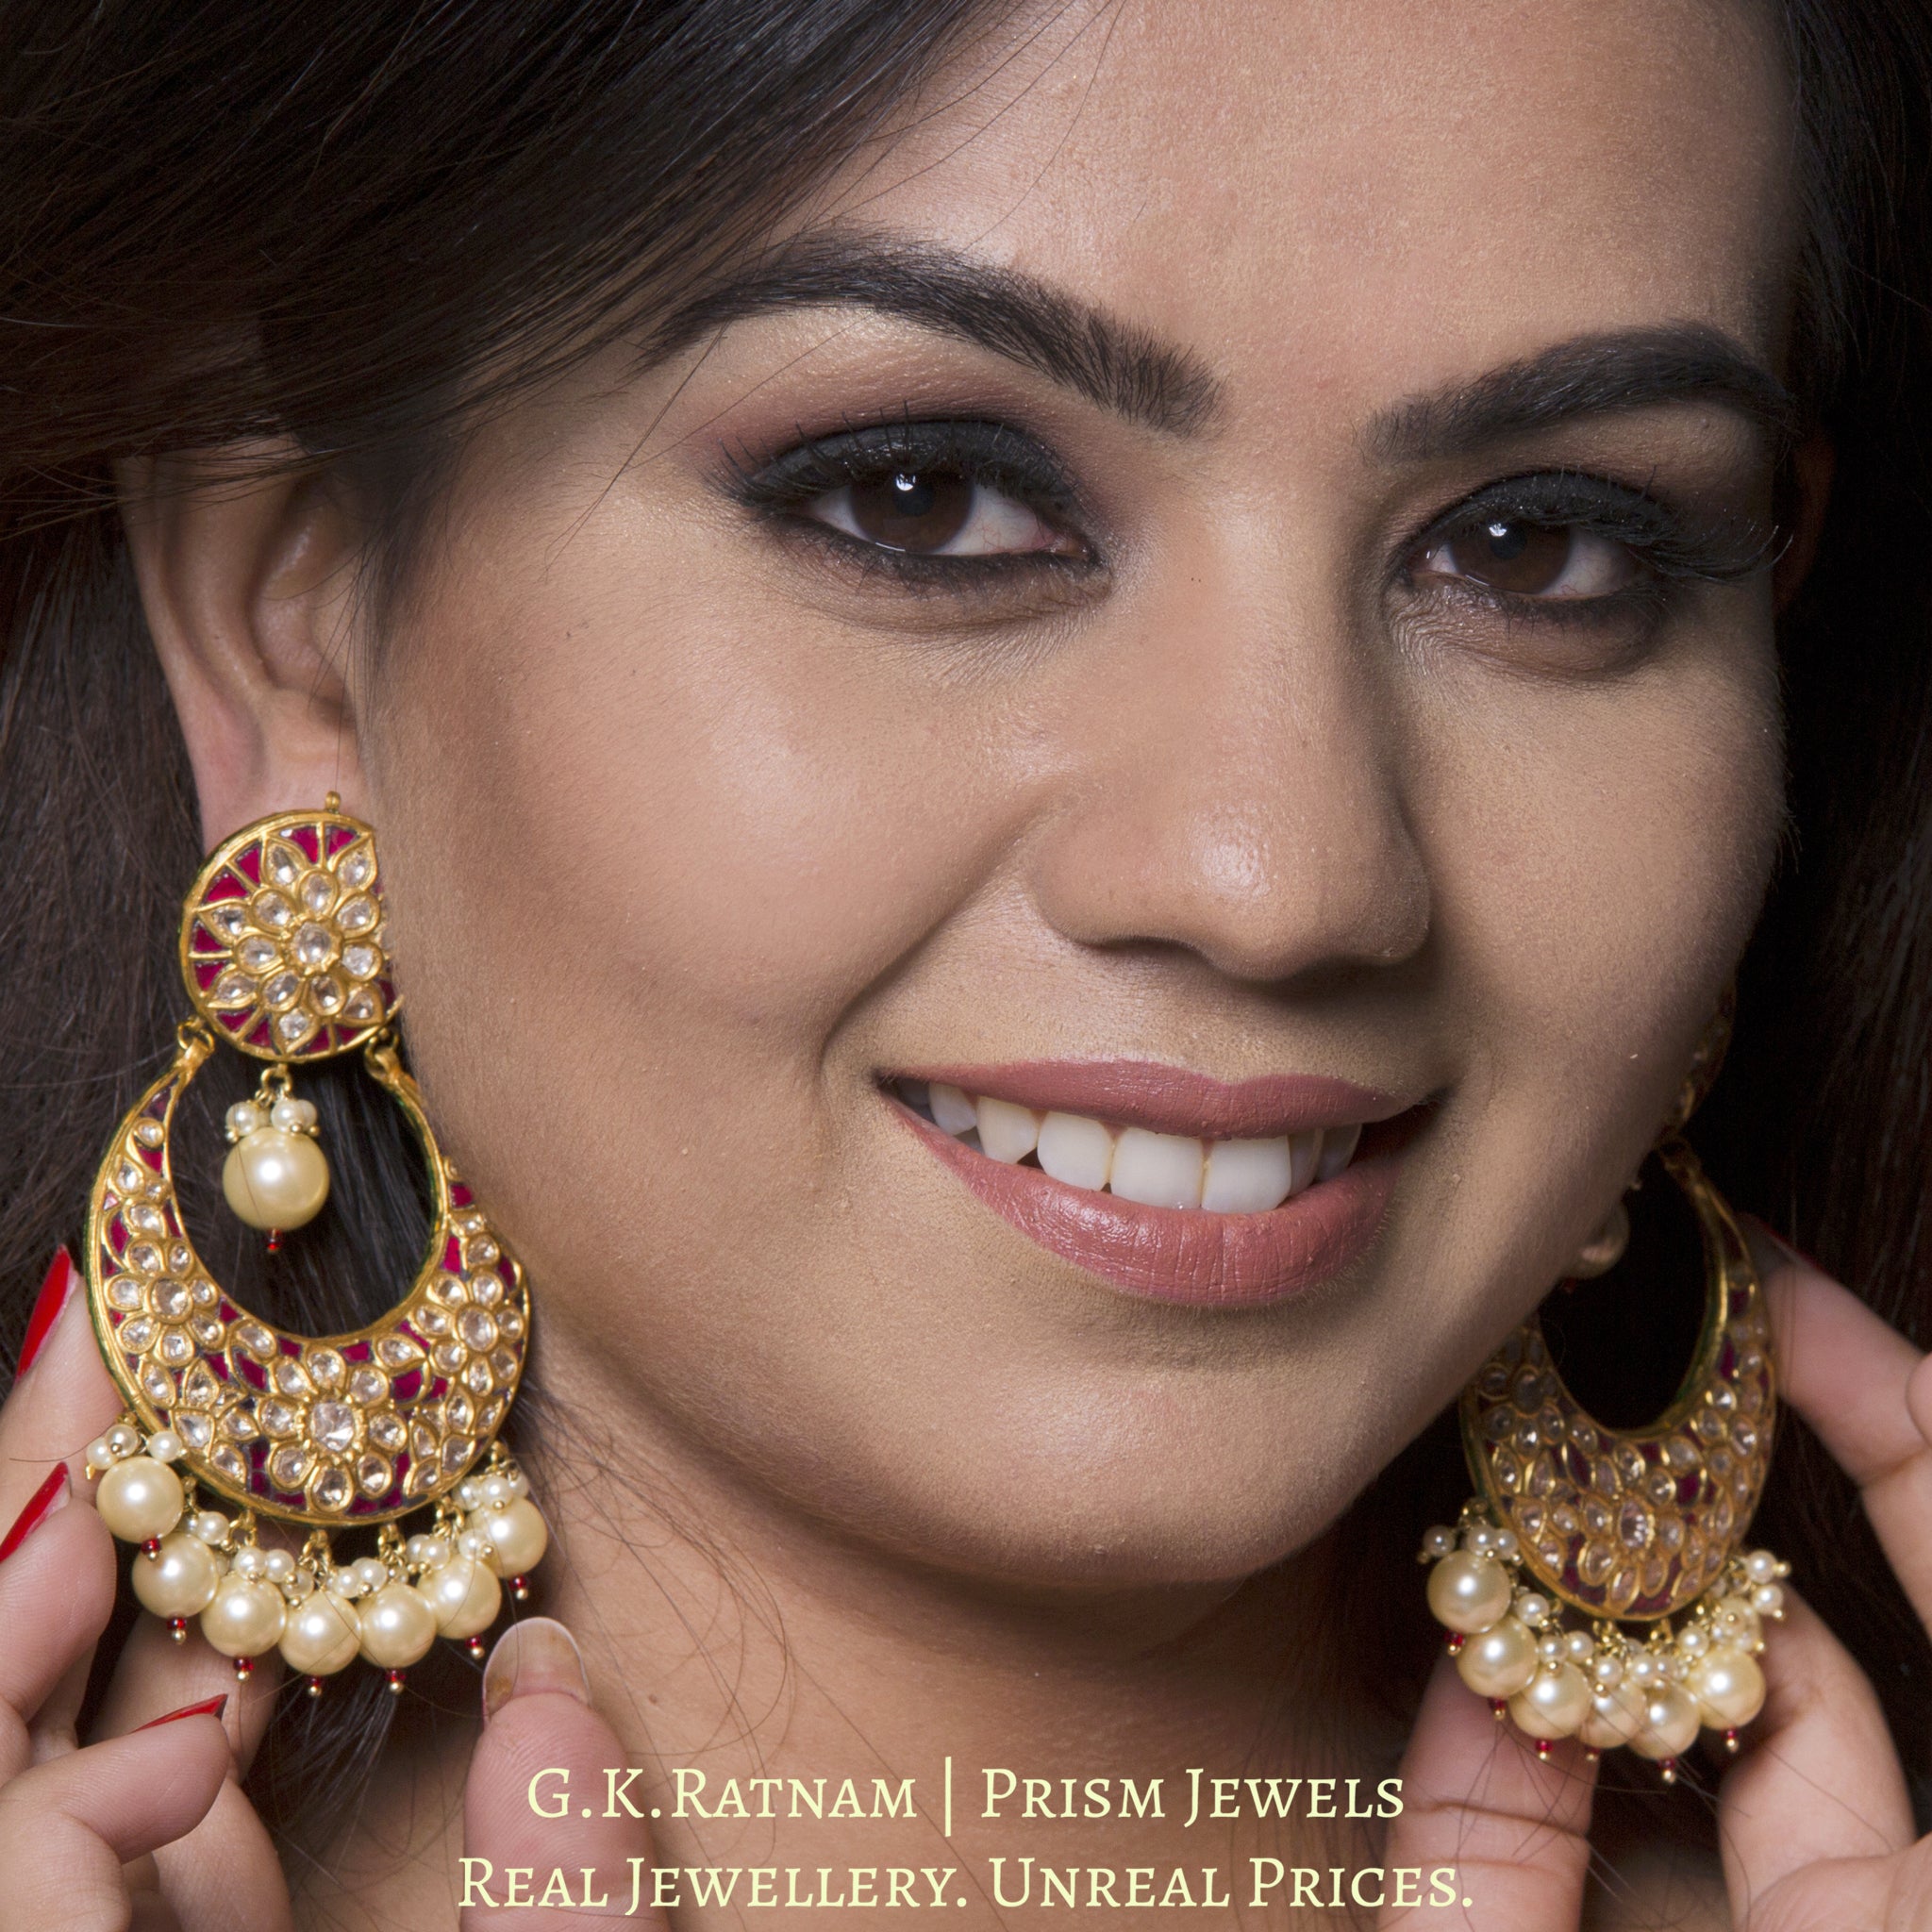 23k Gold and Diamond Polki Chand Bali Earring Pair with ruby-red stones and shell pearls